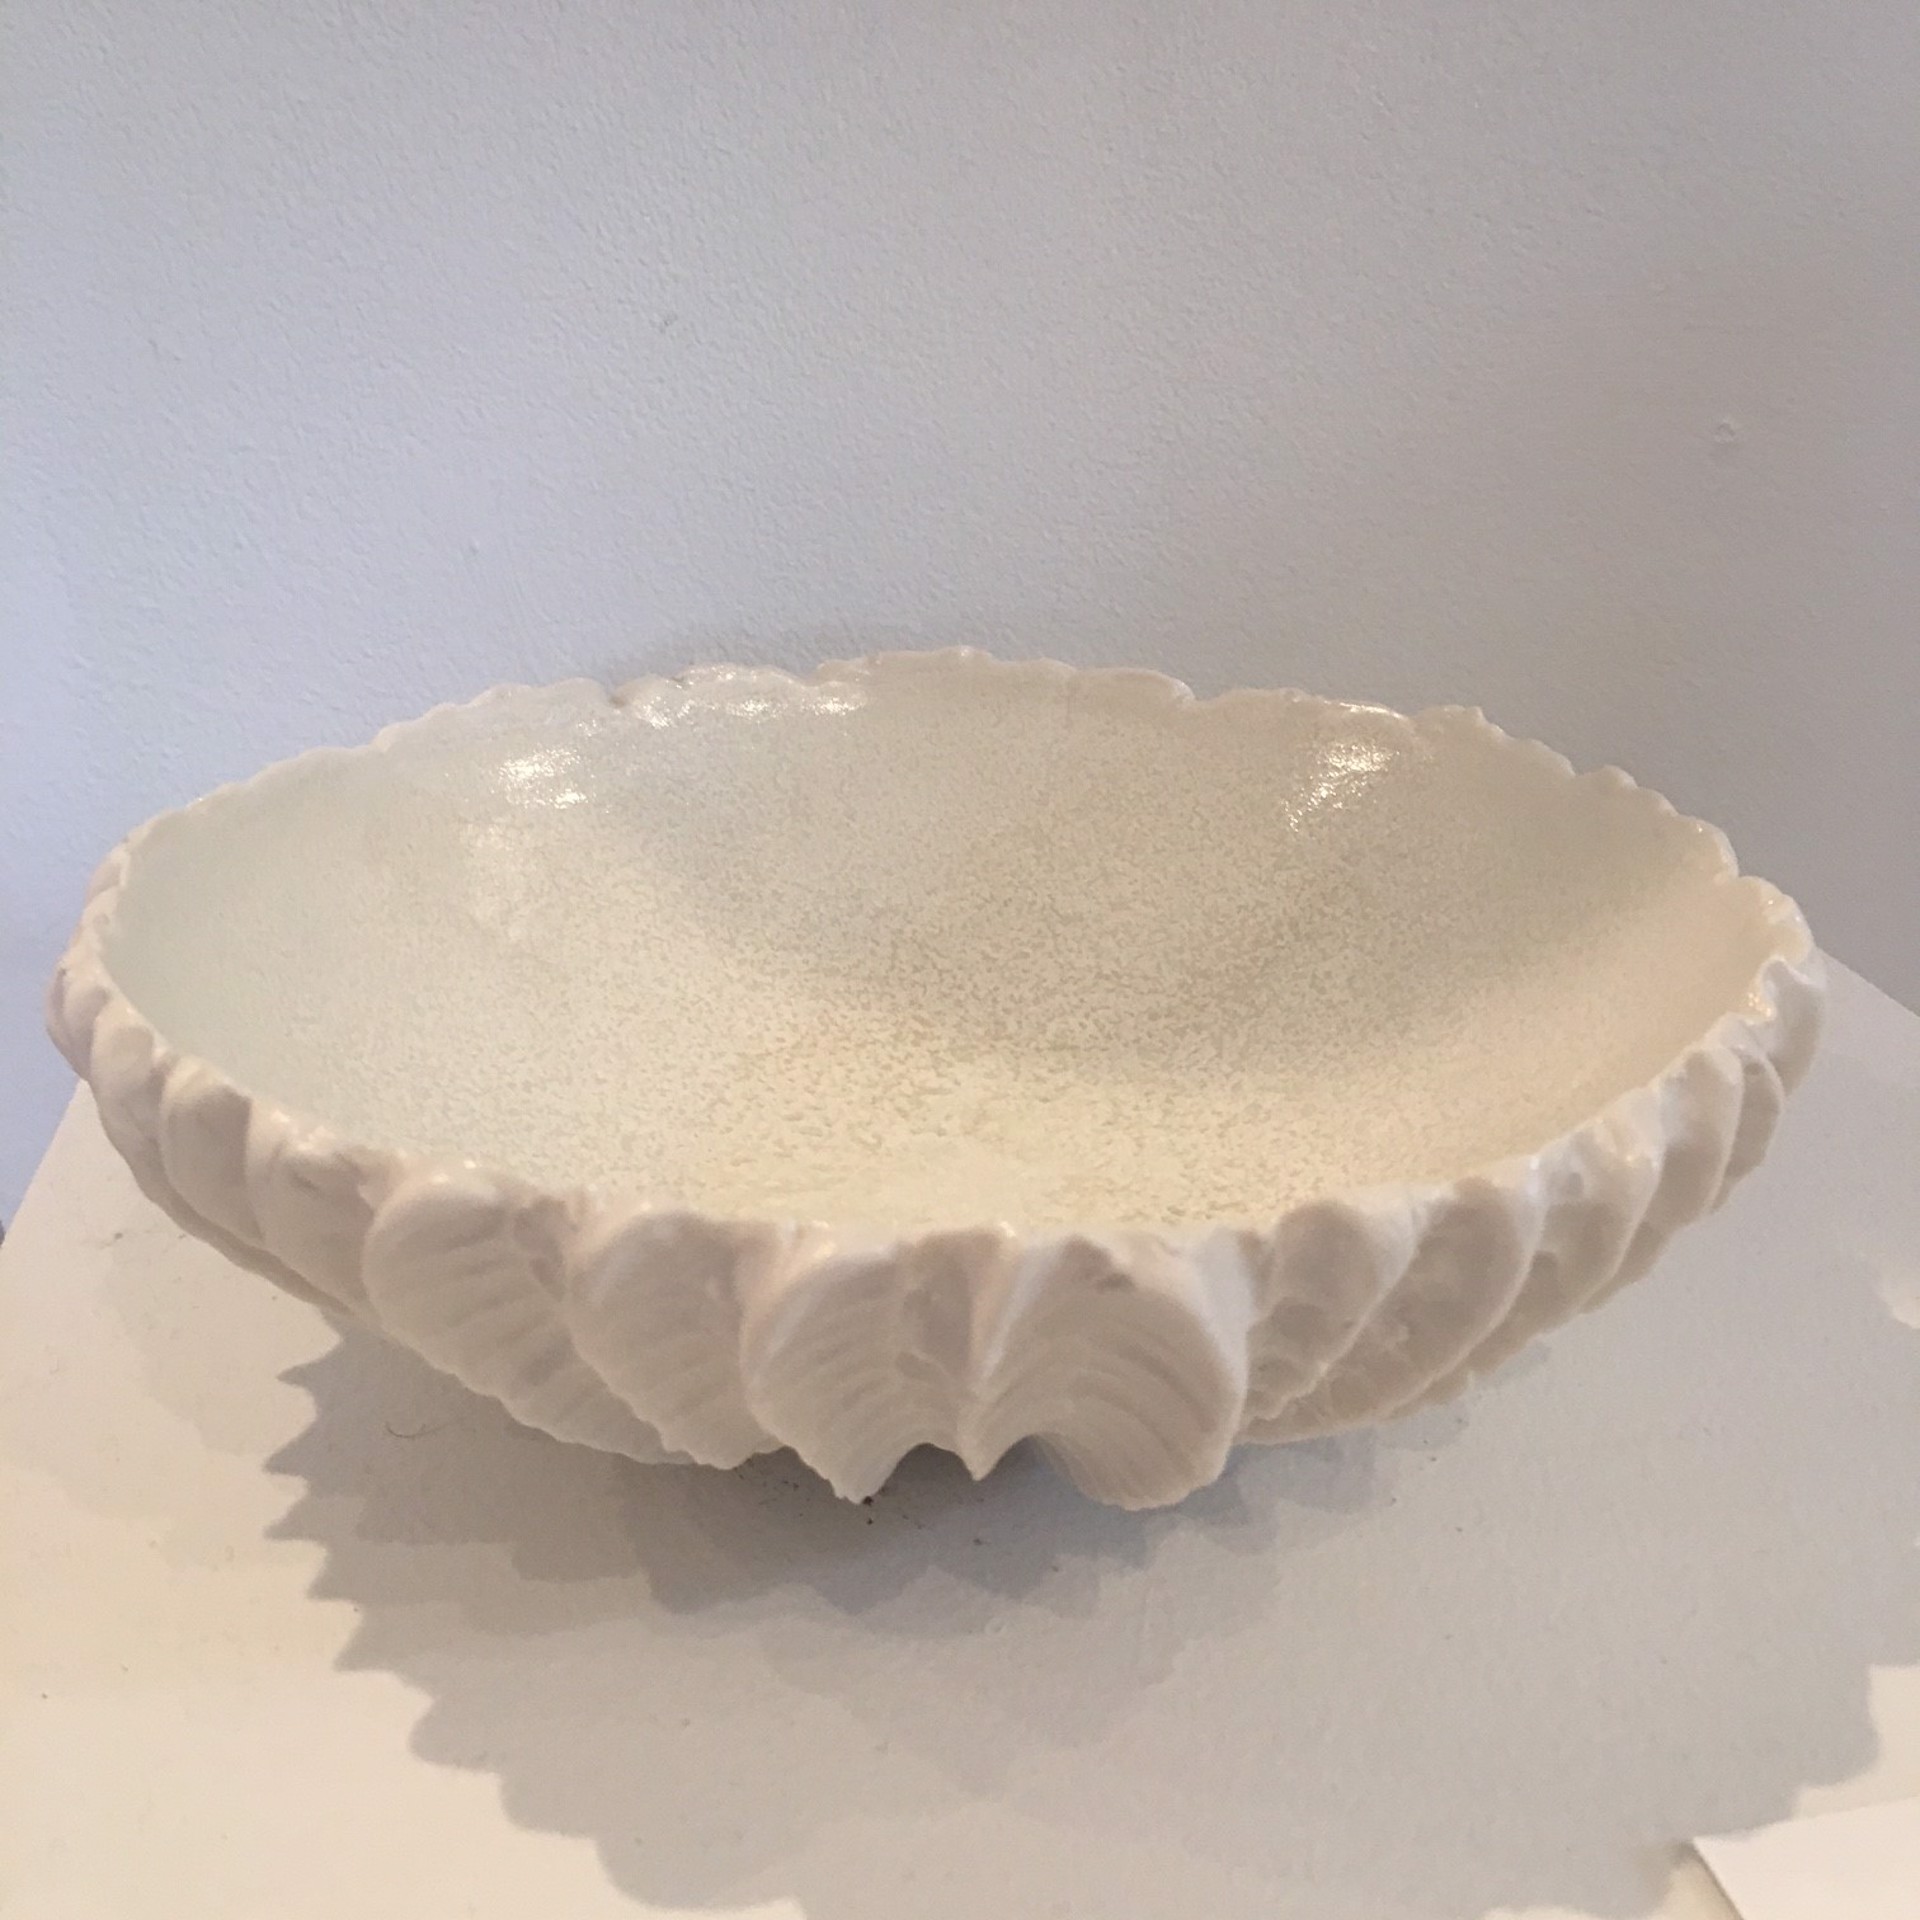 Scallop Bowl with Snowflake Interior by Heather Knight